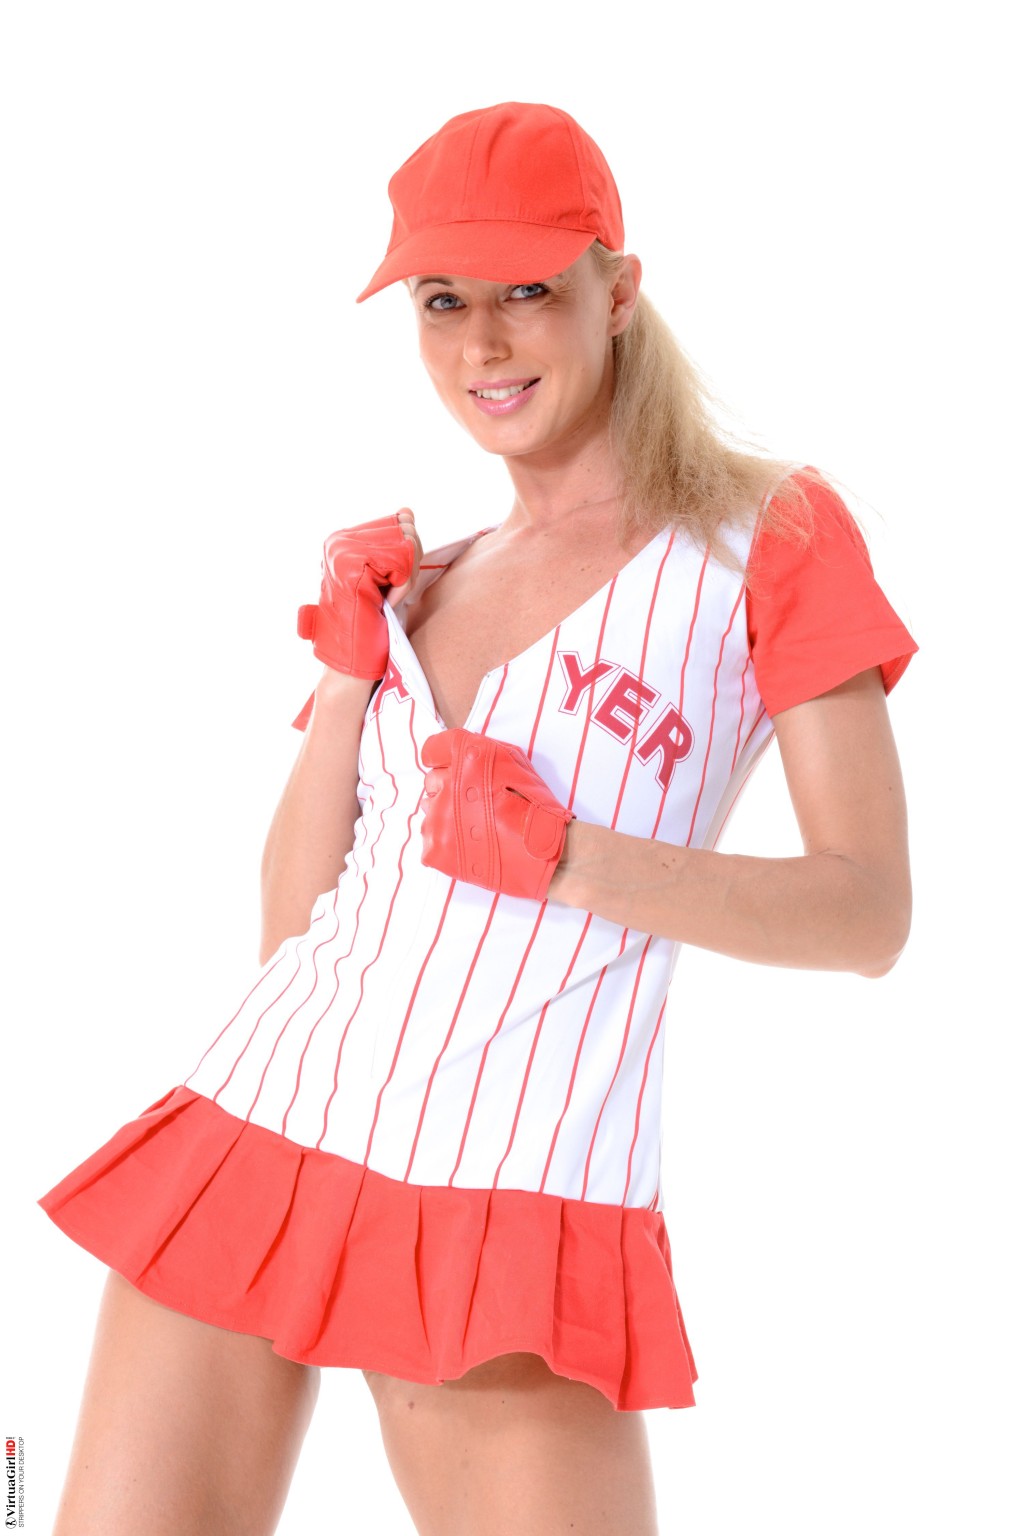 Blonde Babe trägt Baseball-Outfit
 #71204584